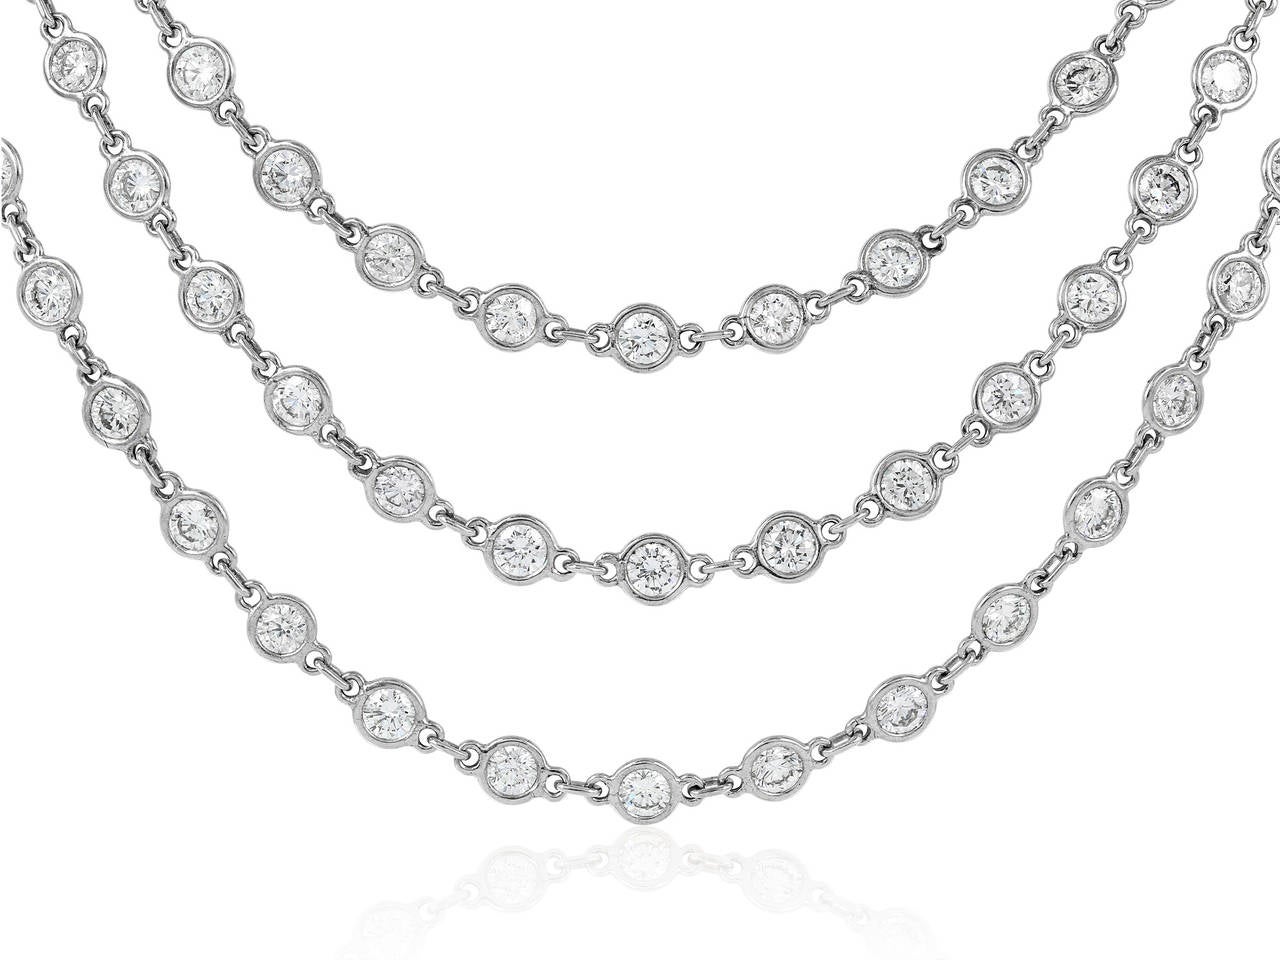 18 karat white gold 63.5 inch by the yard style necklace consisting of 114 bezel set round brilliant cut diamonds having a total weight of 27.35 carats set with an additional .47 carats of full cut diamonds in the clasp.